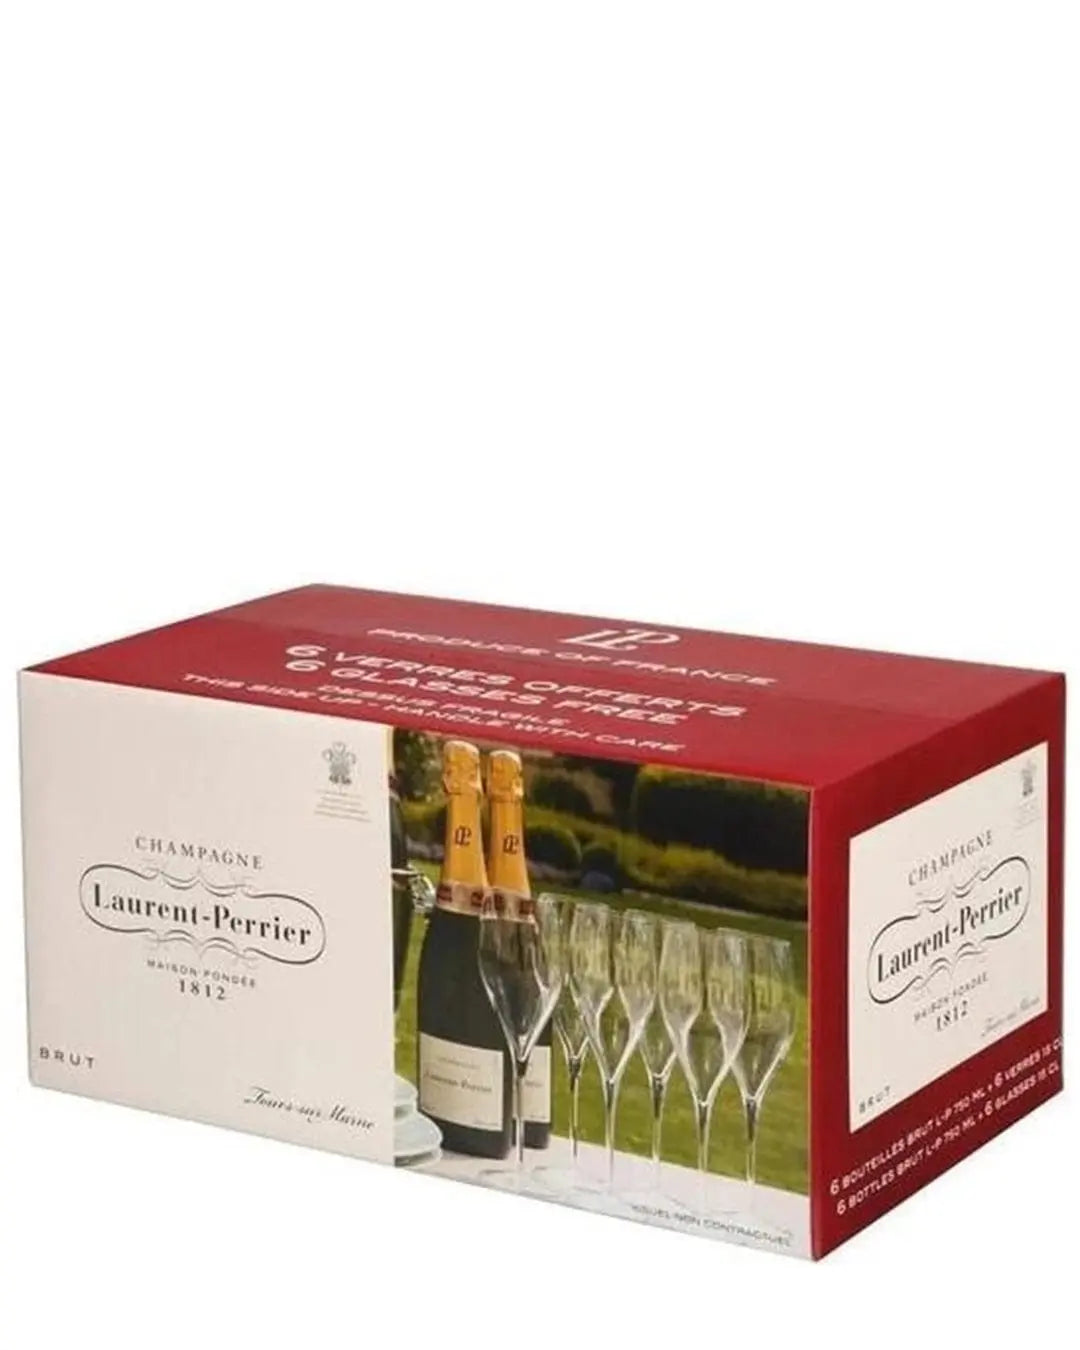 Laurent-Perrier Brut Champagne with 6 Flutes, 75 cl Champagne & Sparkling